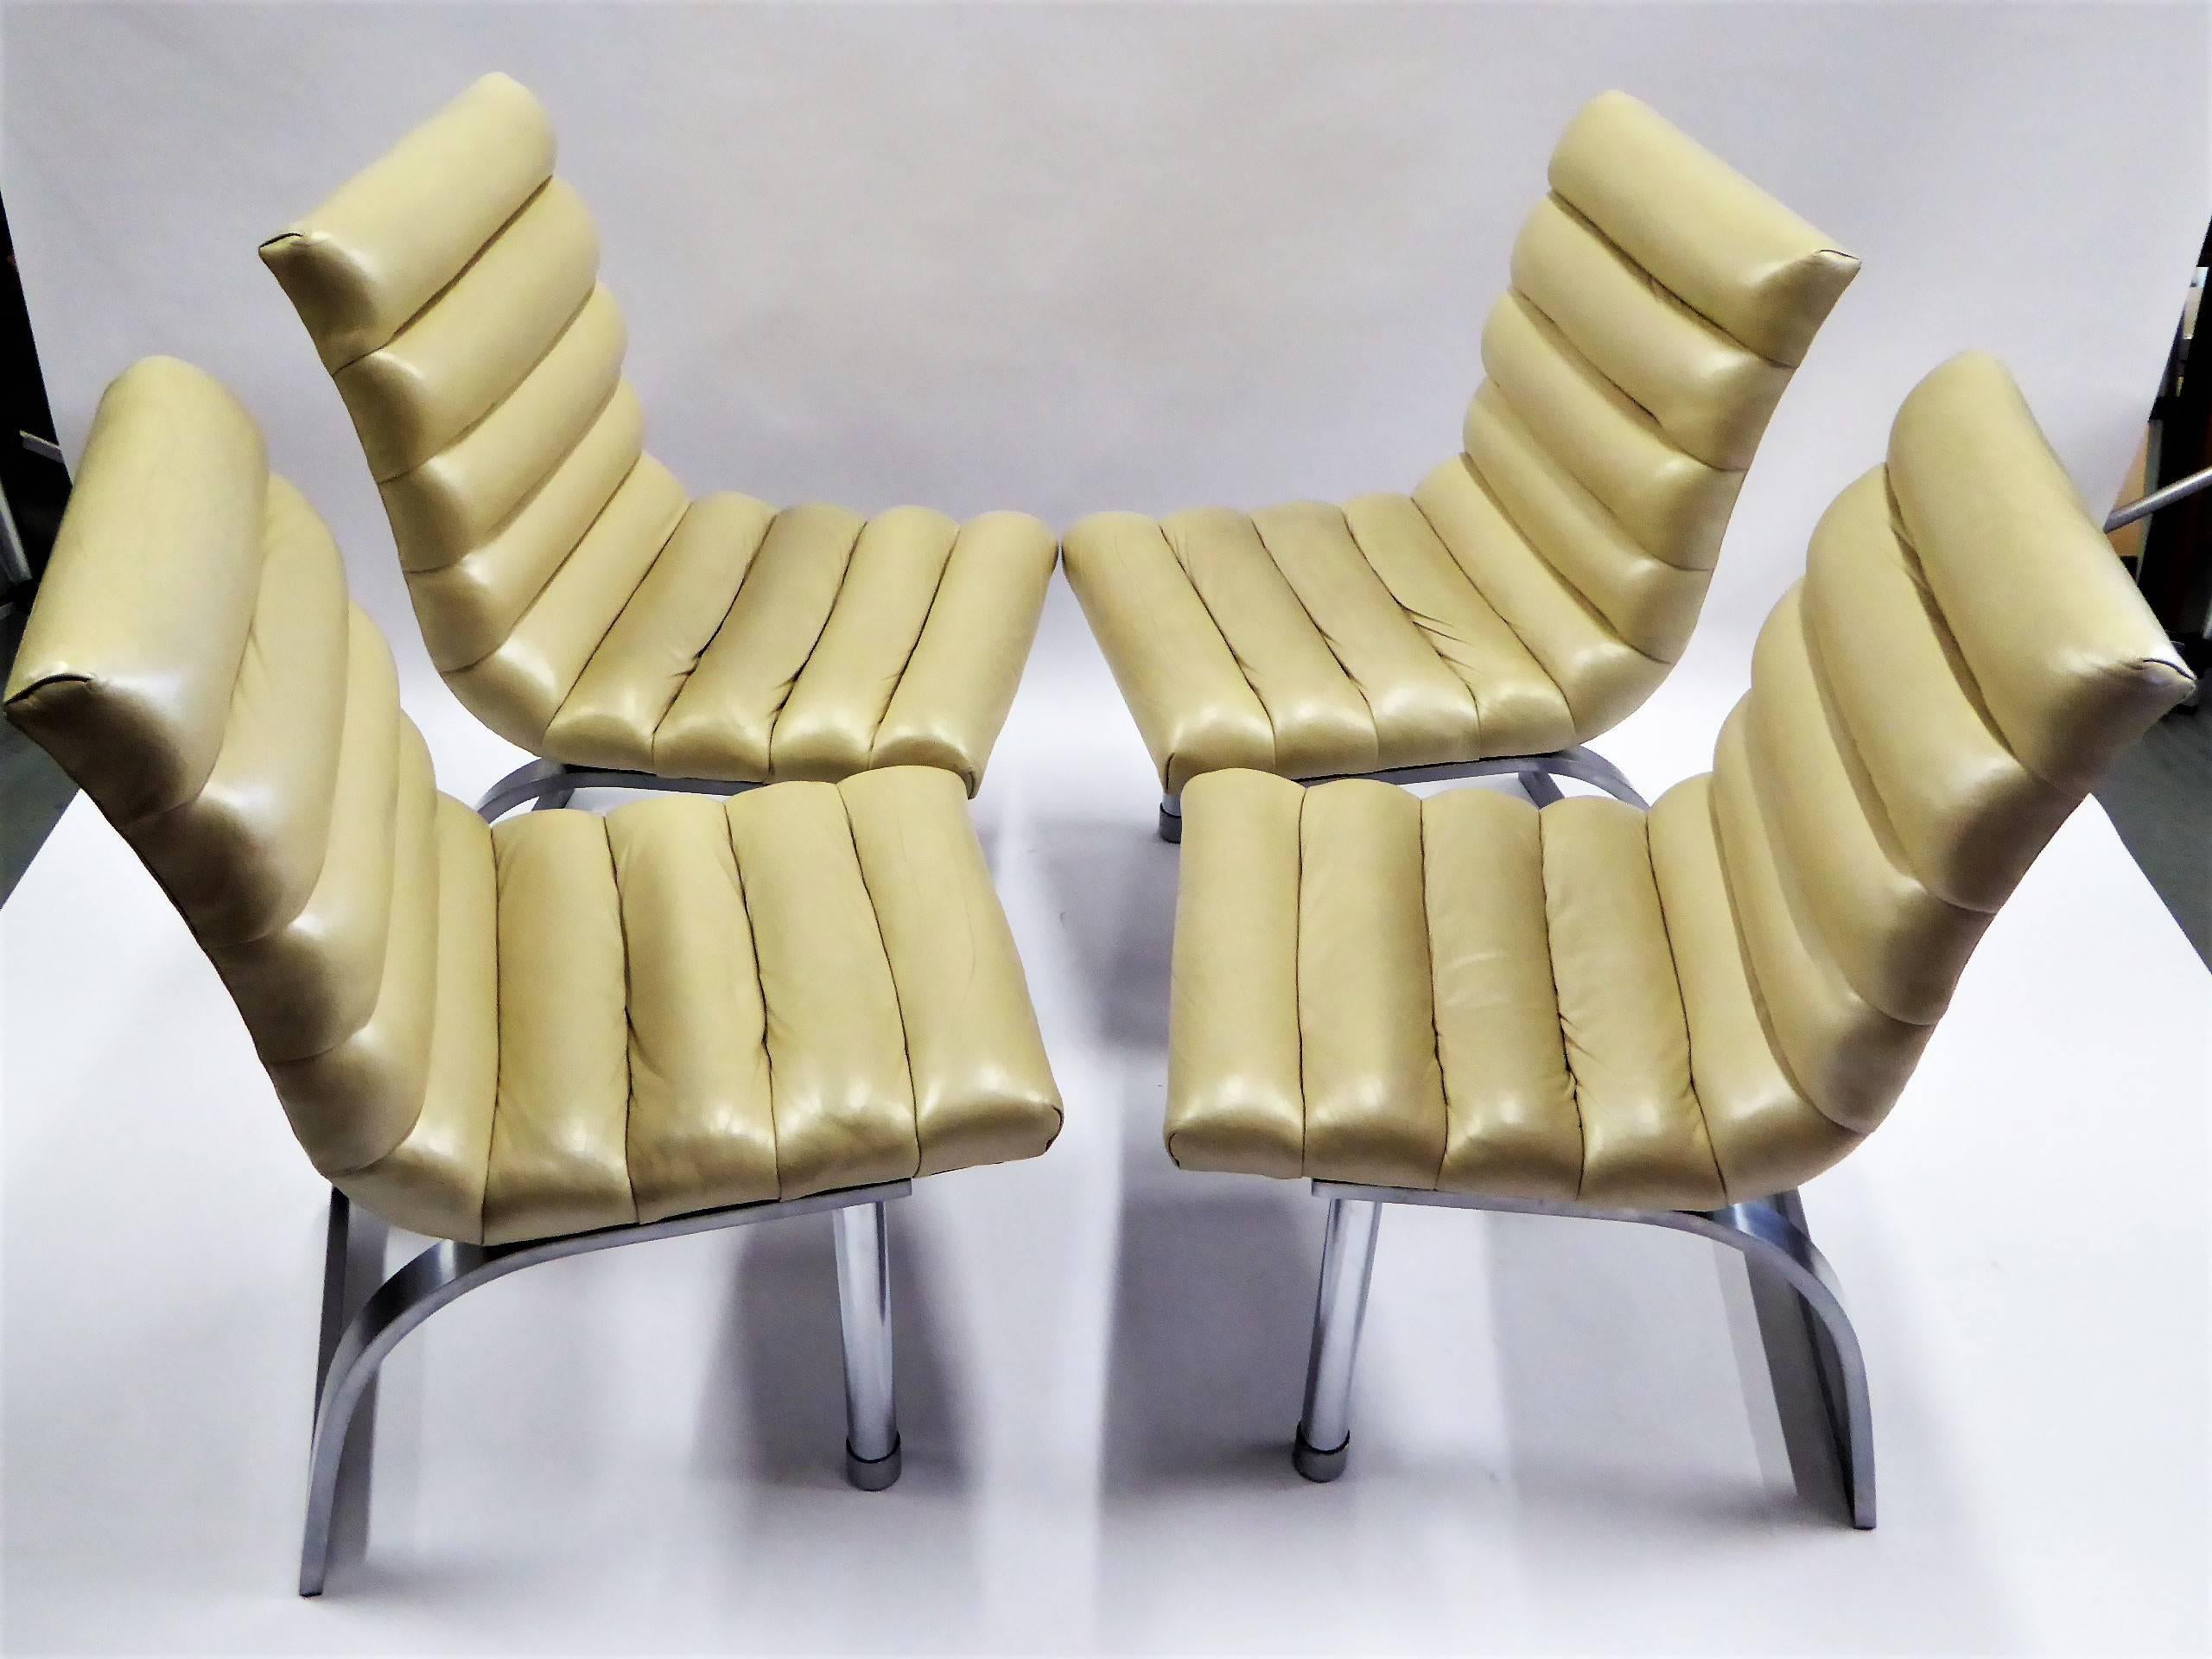 Stainless Steel Eight Jay Spectre 1980s Eclipse Dining Chairs in Leather